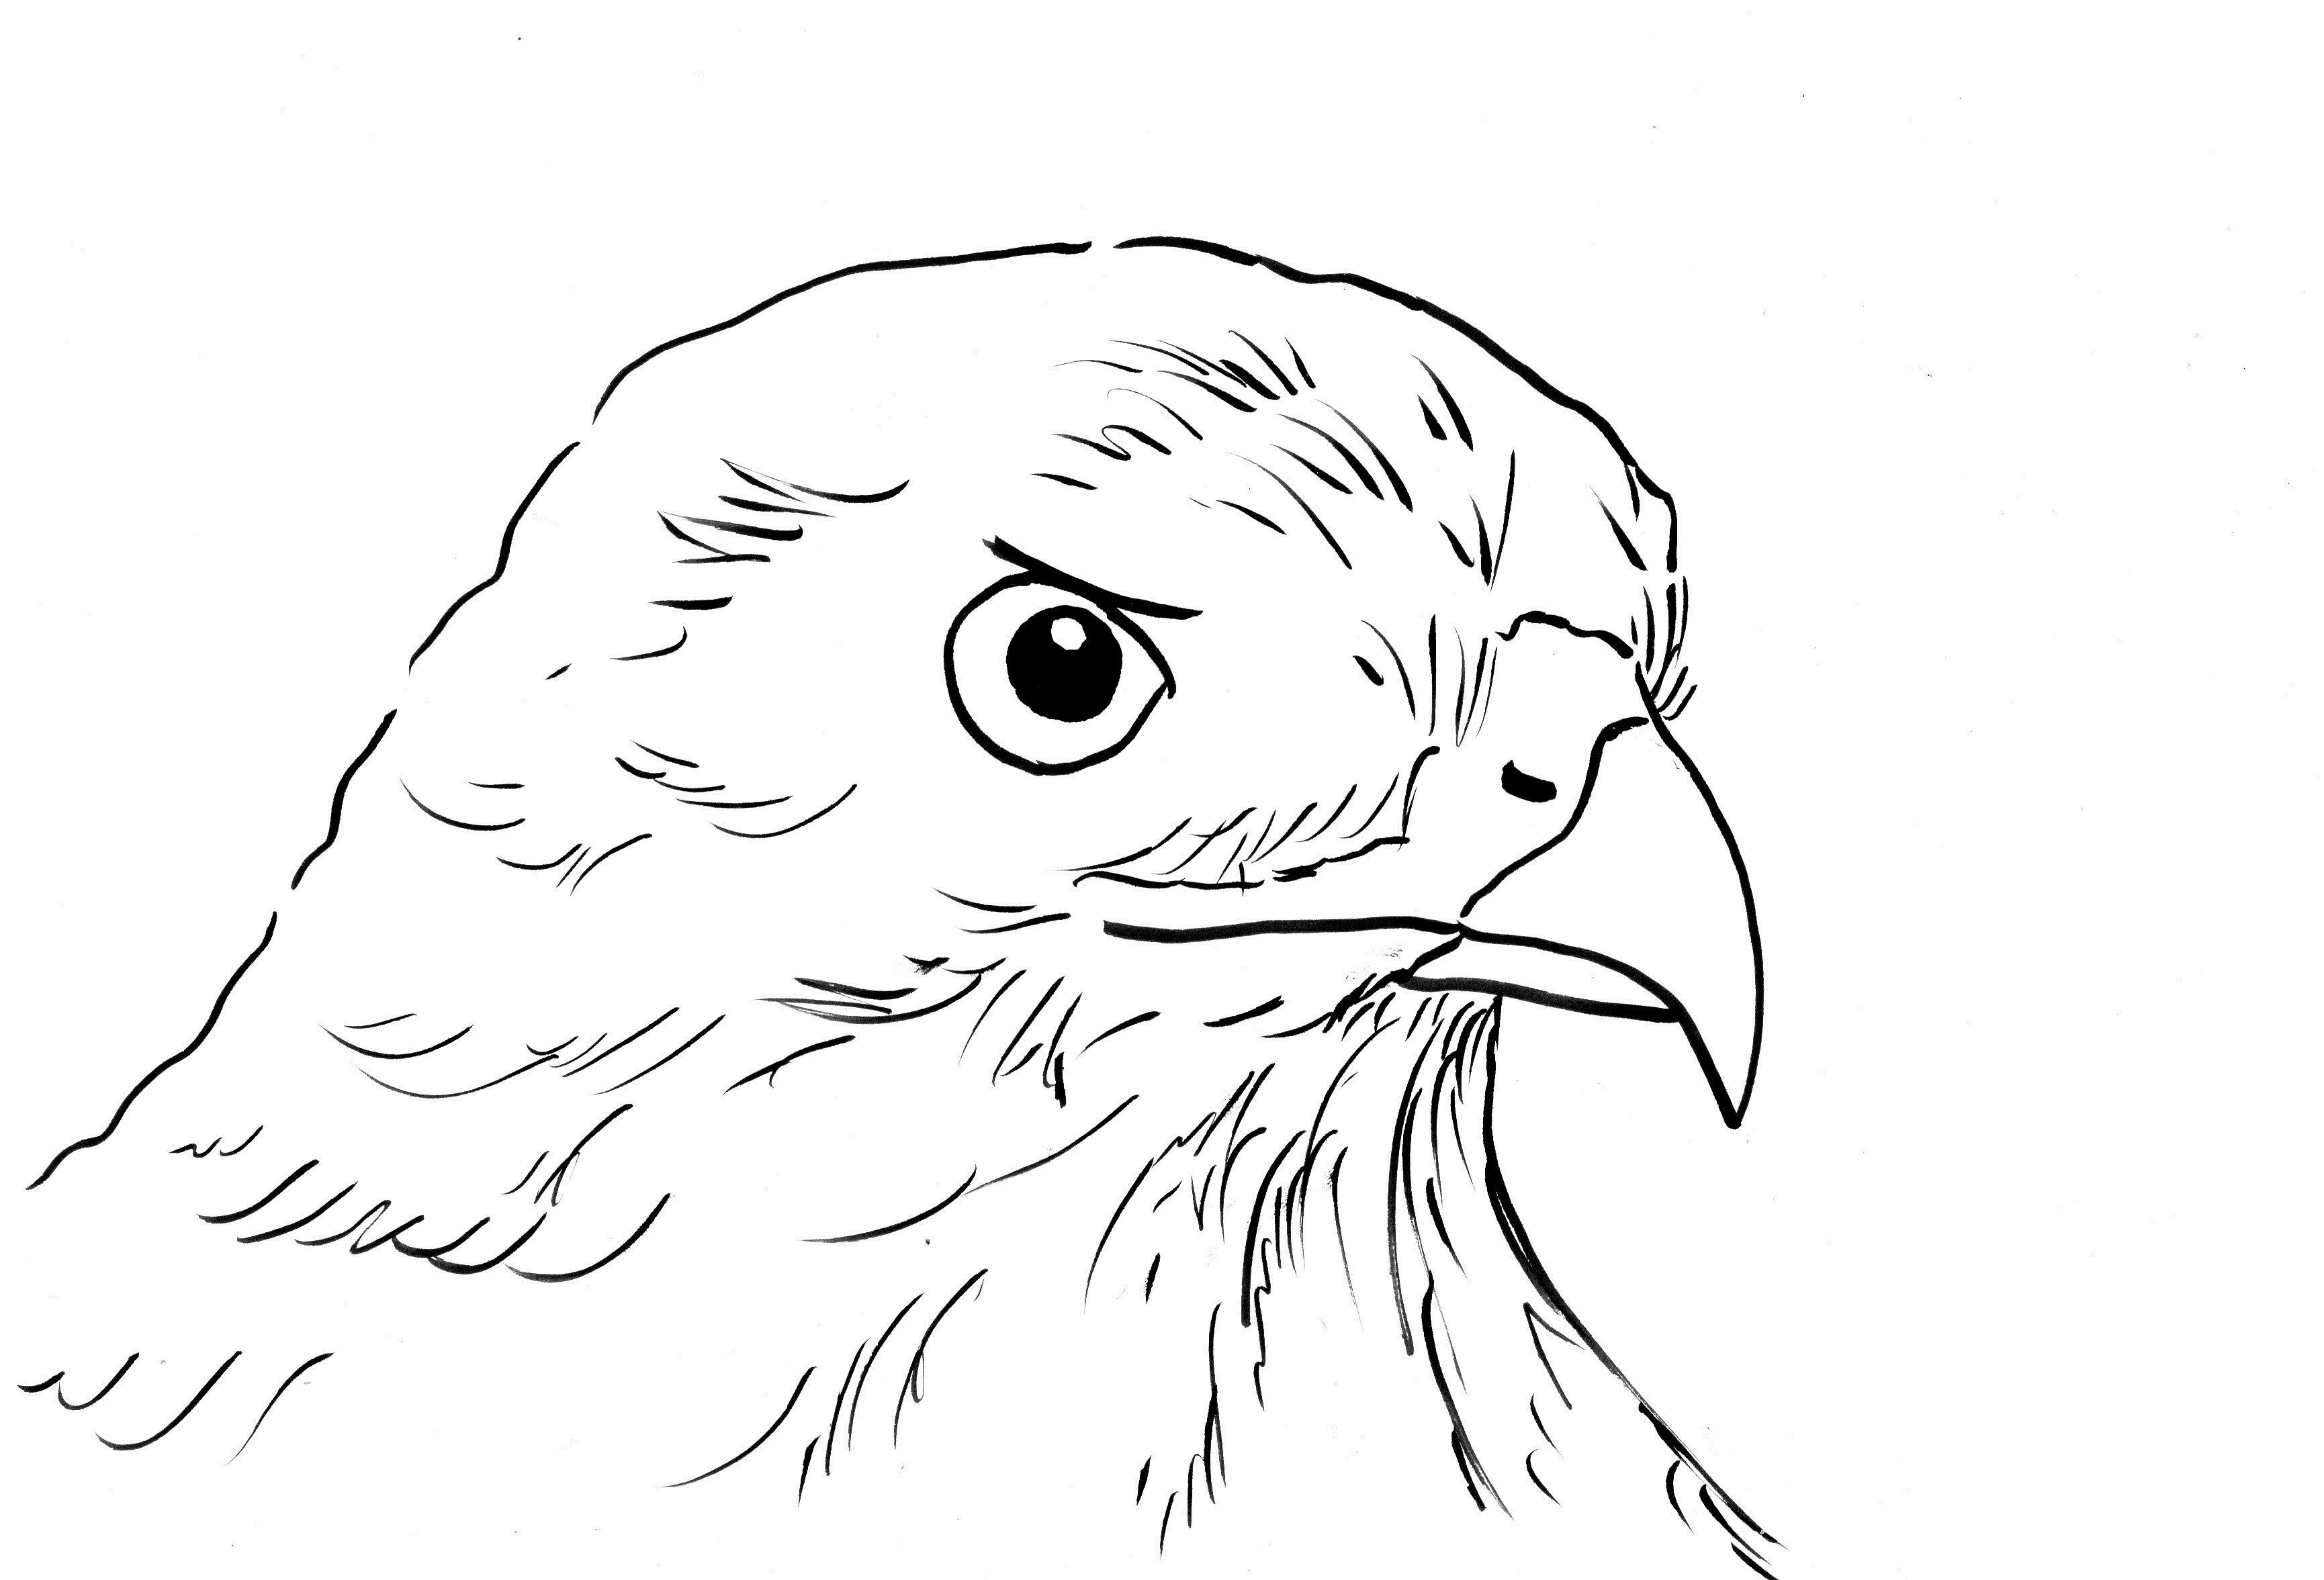 Hawk Coloring Pages
 Hawk Coloring Page Samantha Bell